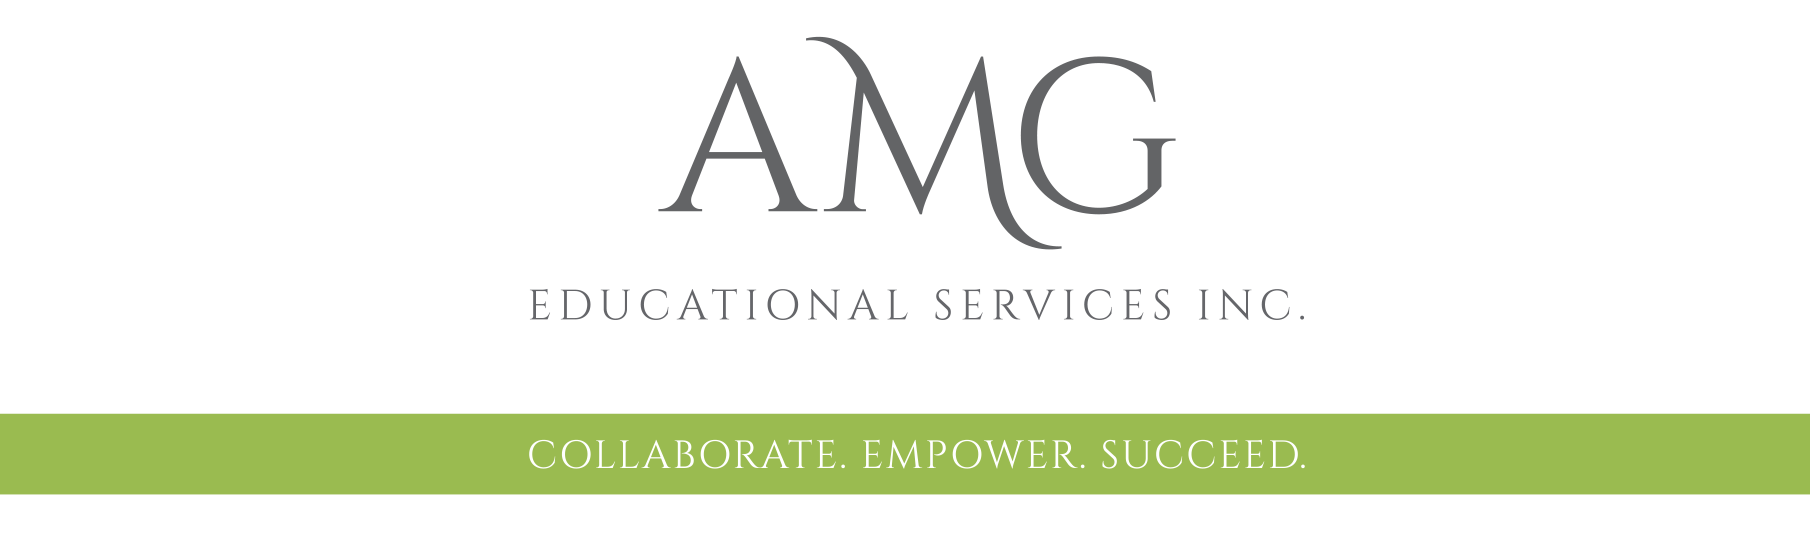 AMG Educational Services